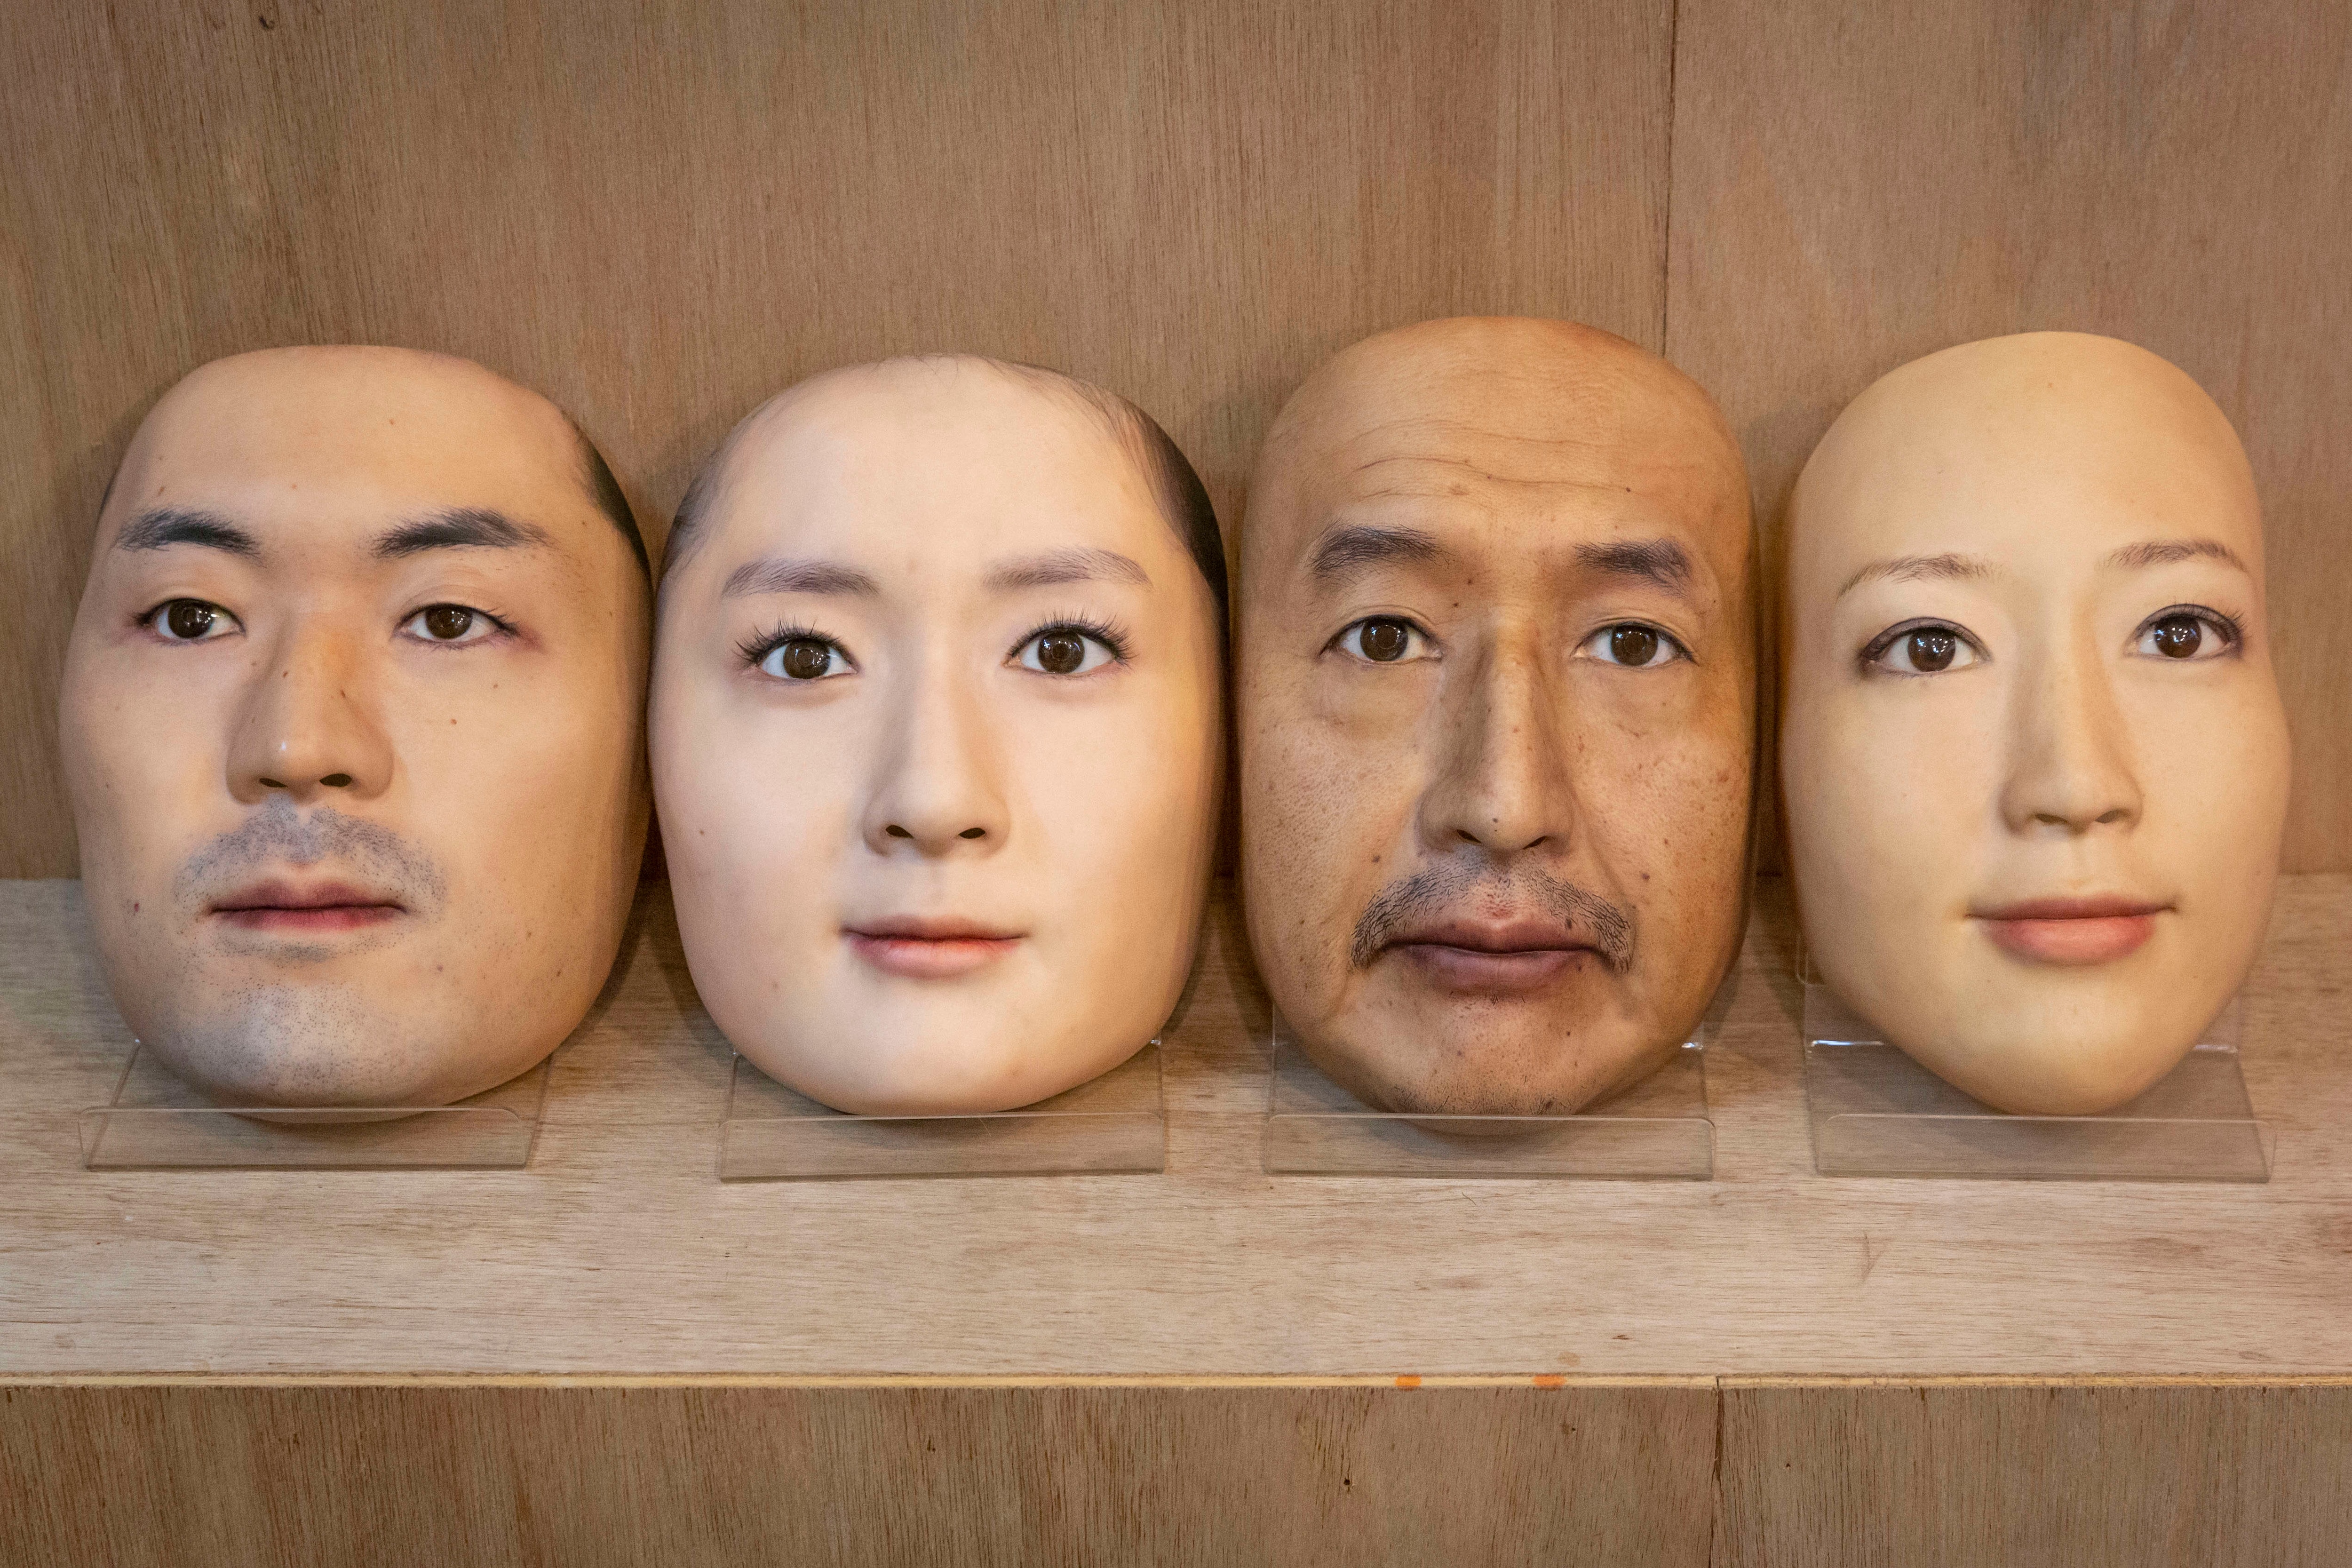 Lifelike 3D printed masks from Okawara are realistic human face clones | SYFY WIRE